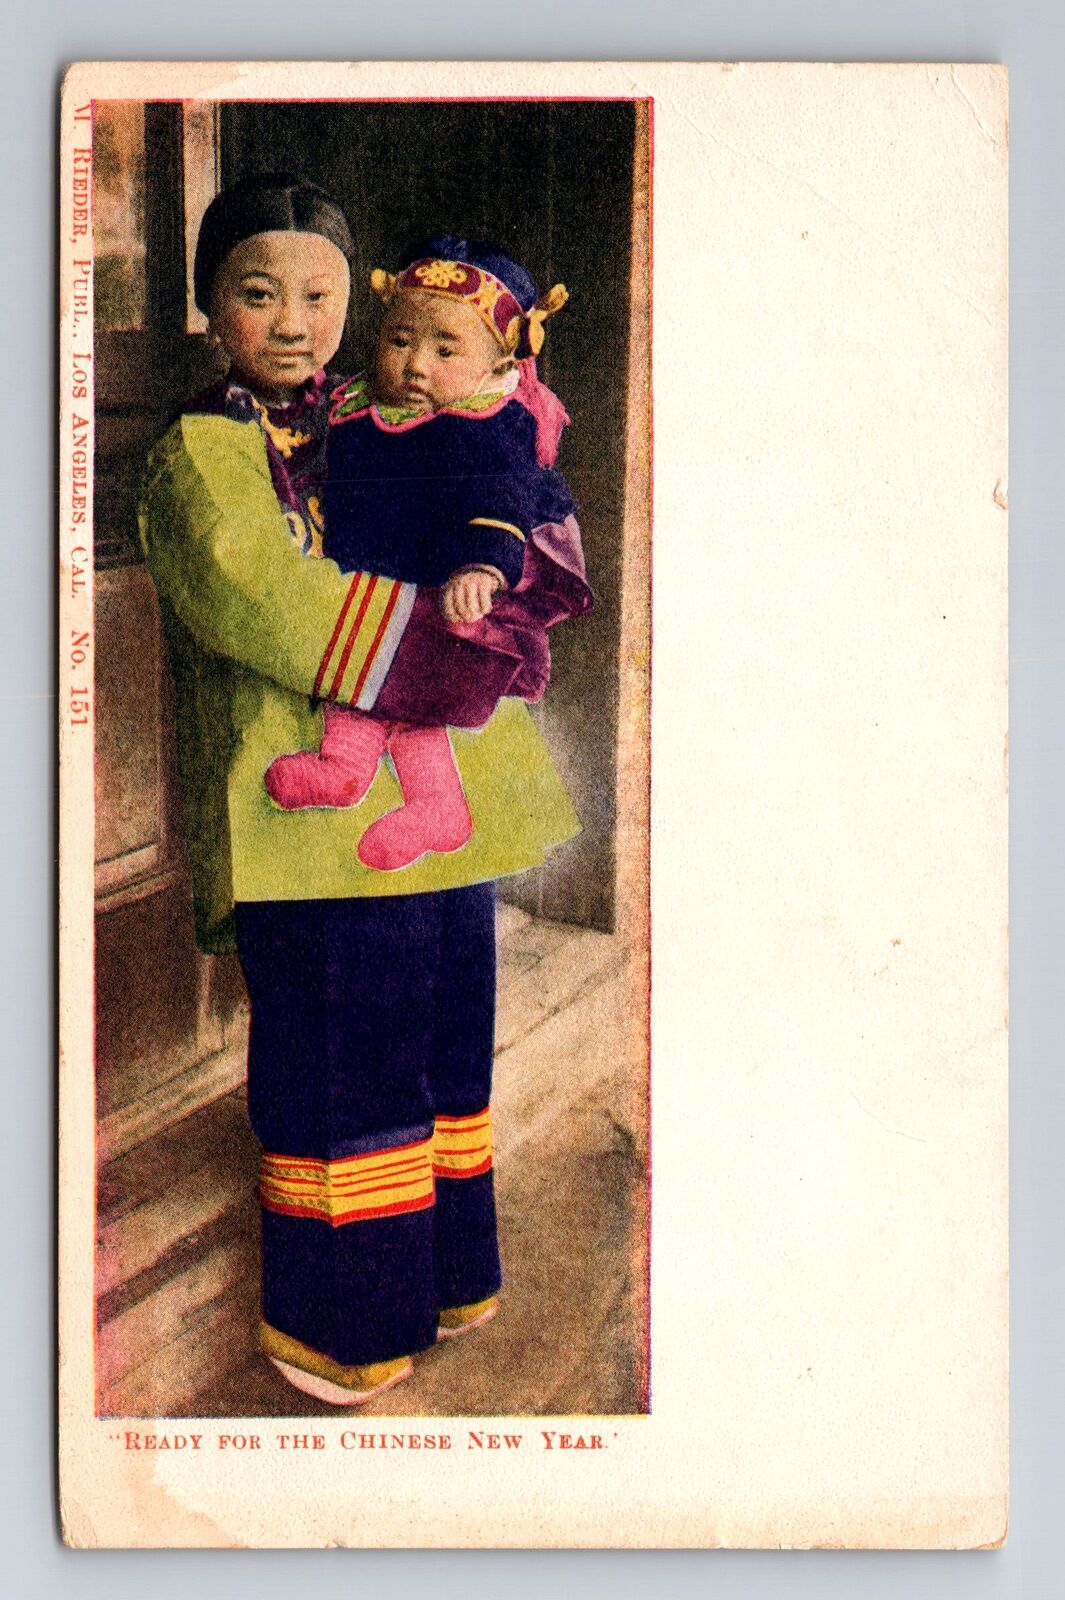 CA-California, Mother & Baby Ready For Chinese New Year, Vintage Postcard